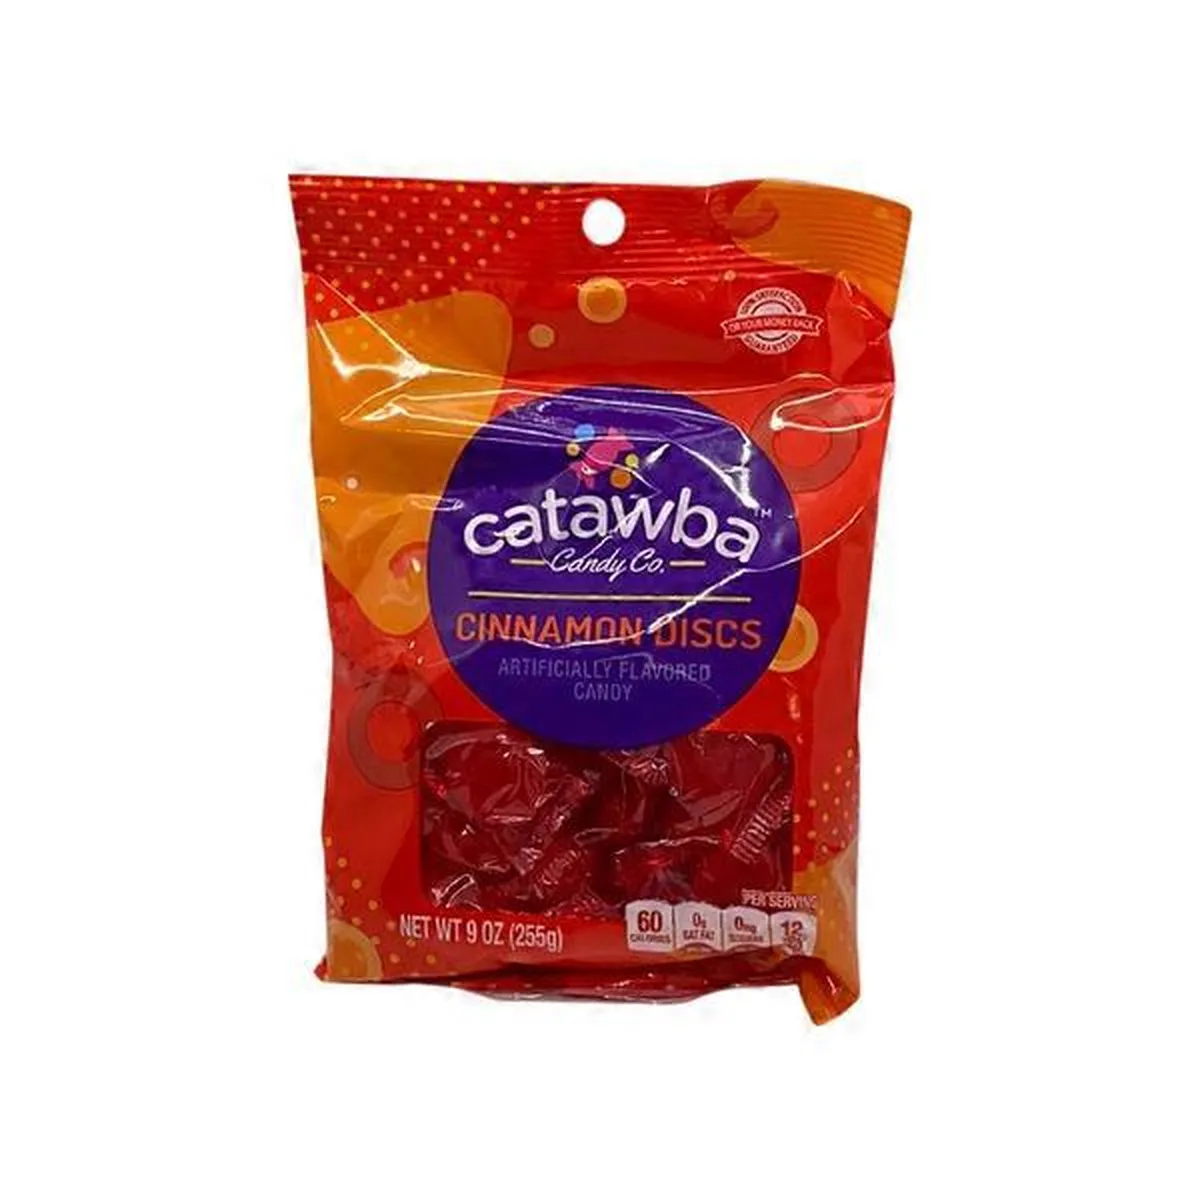 Catawba Candy Co. Cinnamon Discs Candy (9 oz) Delivery or Pickup